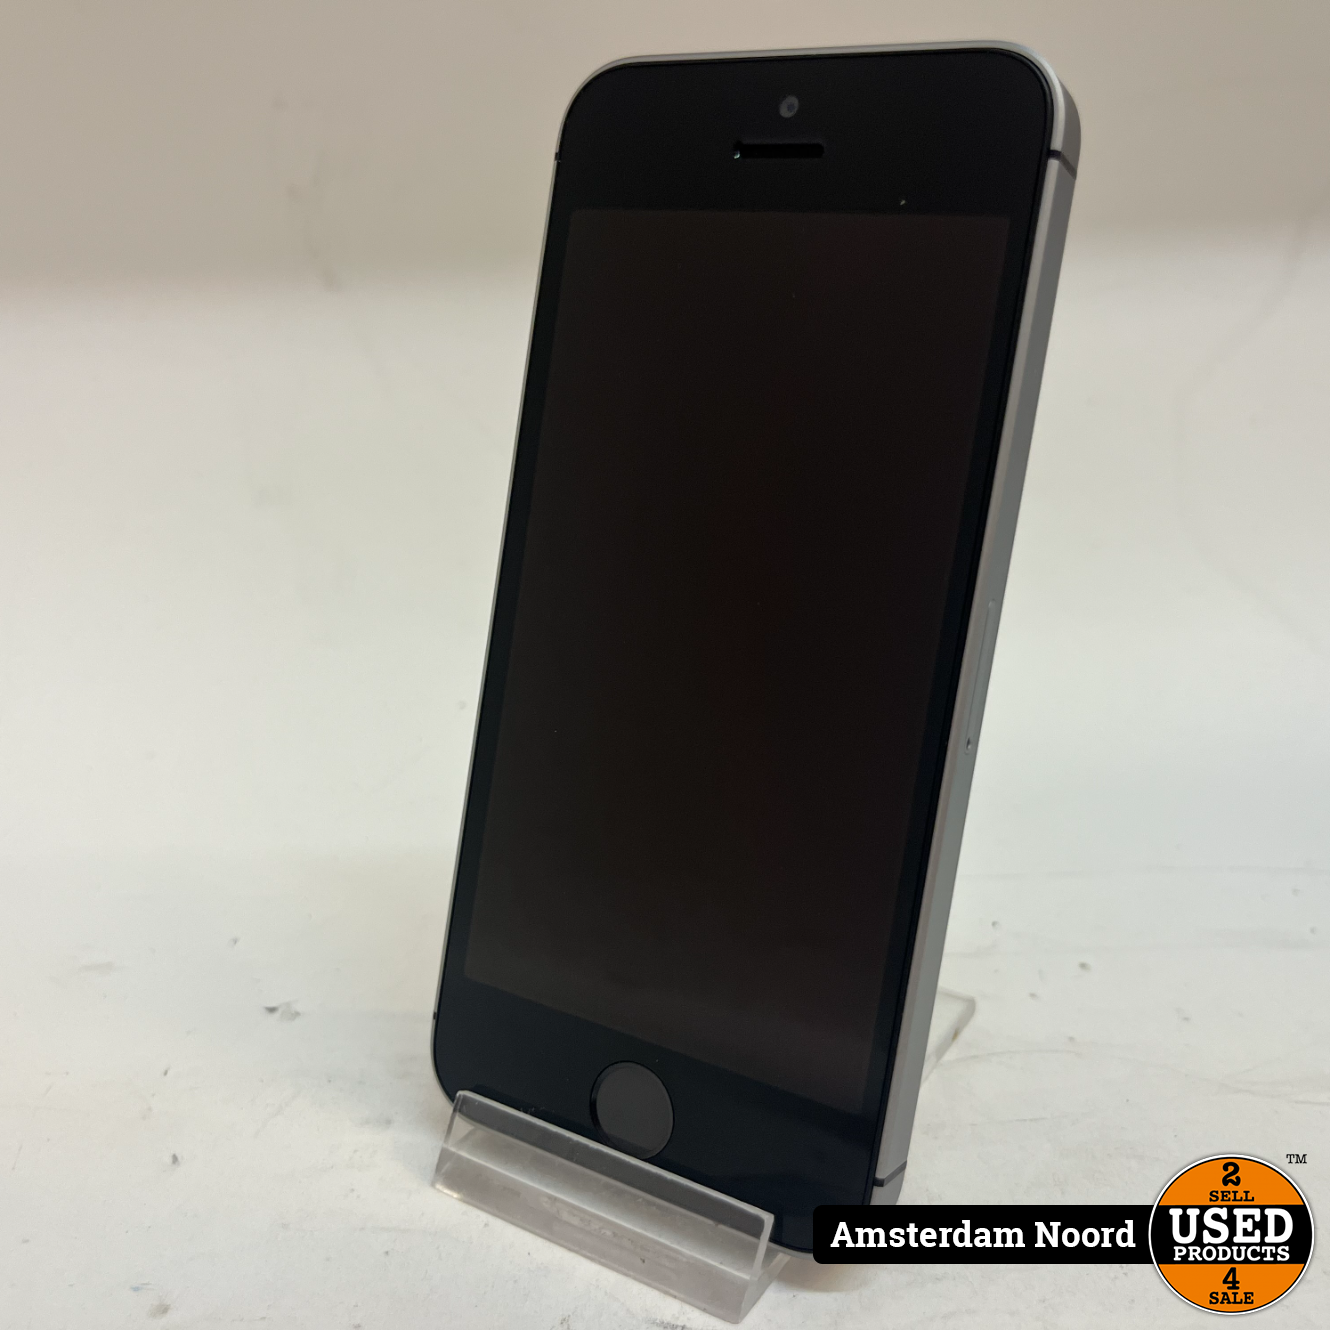 Apple iPhone 2016 32GB Grijs - Used Products Amsterdam